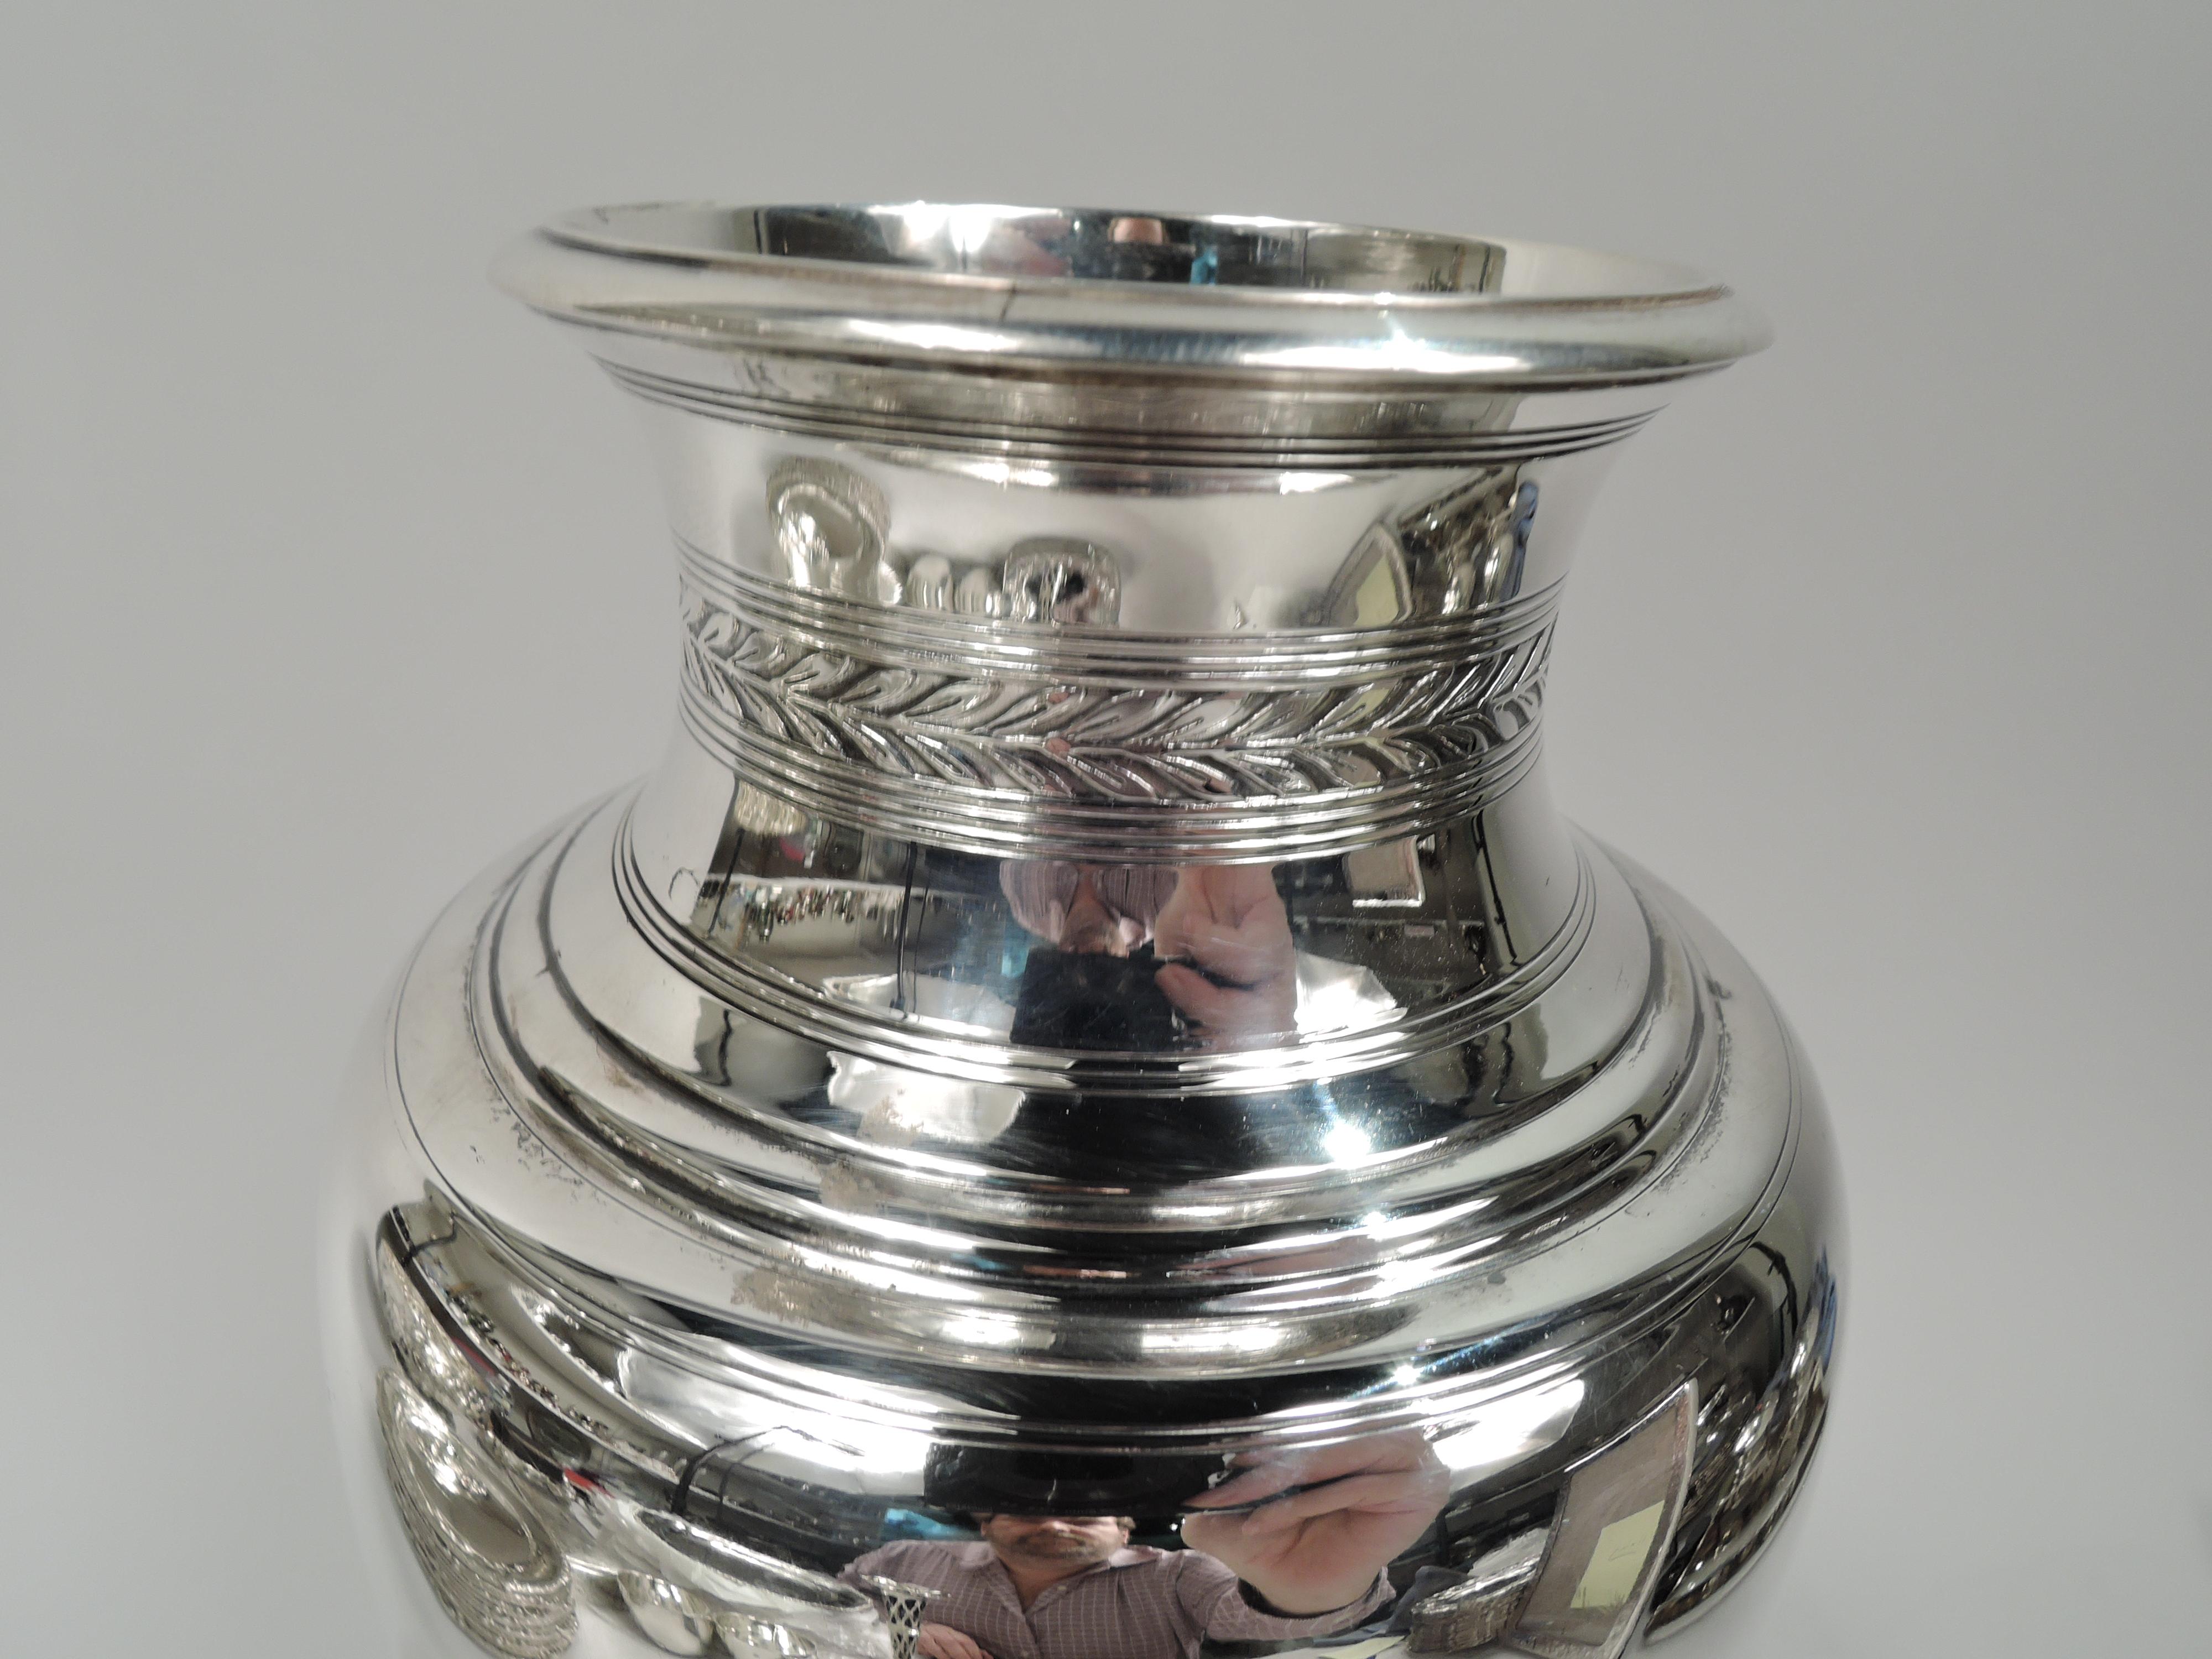 Modern Classical sterling silver vase. Made by Tiffany & Co. in New York, ca 1913. Ovoid body with short inset neck and raised foot. Engraved and acid-etched stylized ornament: Imbricated leaf border on neck and egg-and-dart border on foot.